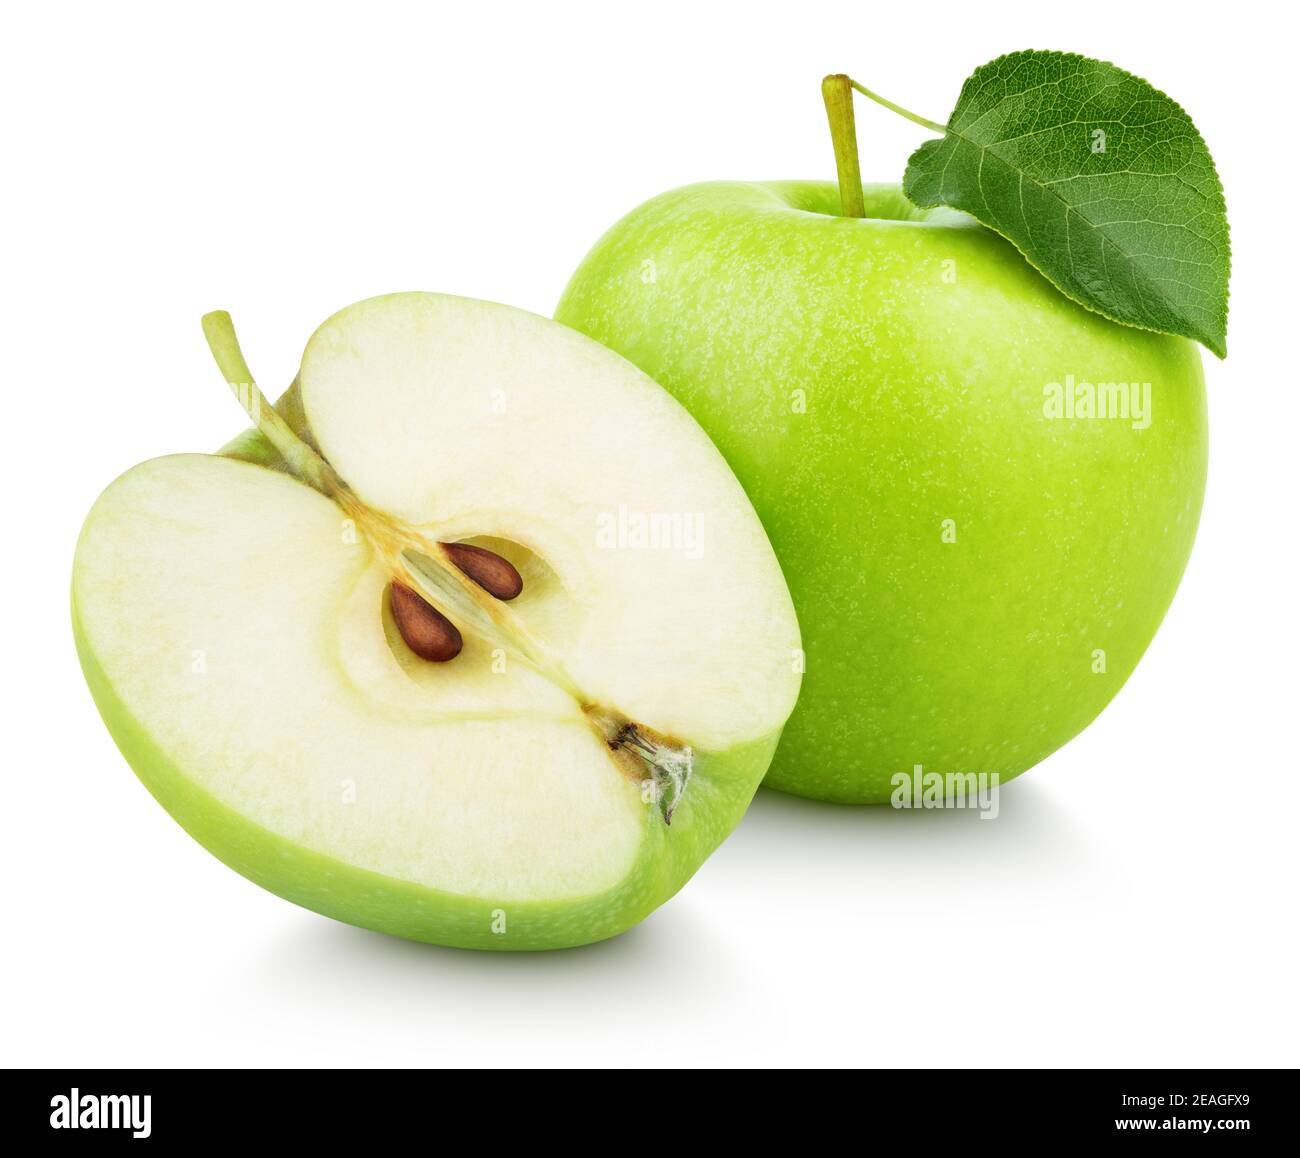 Ripe green apple fruit with apple half and green apple leaf isolated on white background. Apples and leaf with clipping path Stock Photo